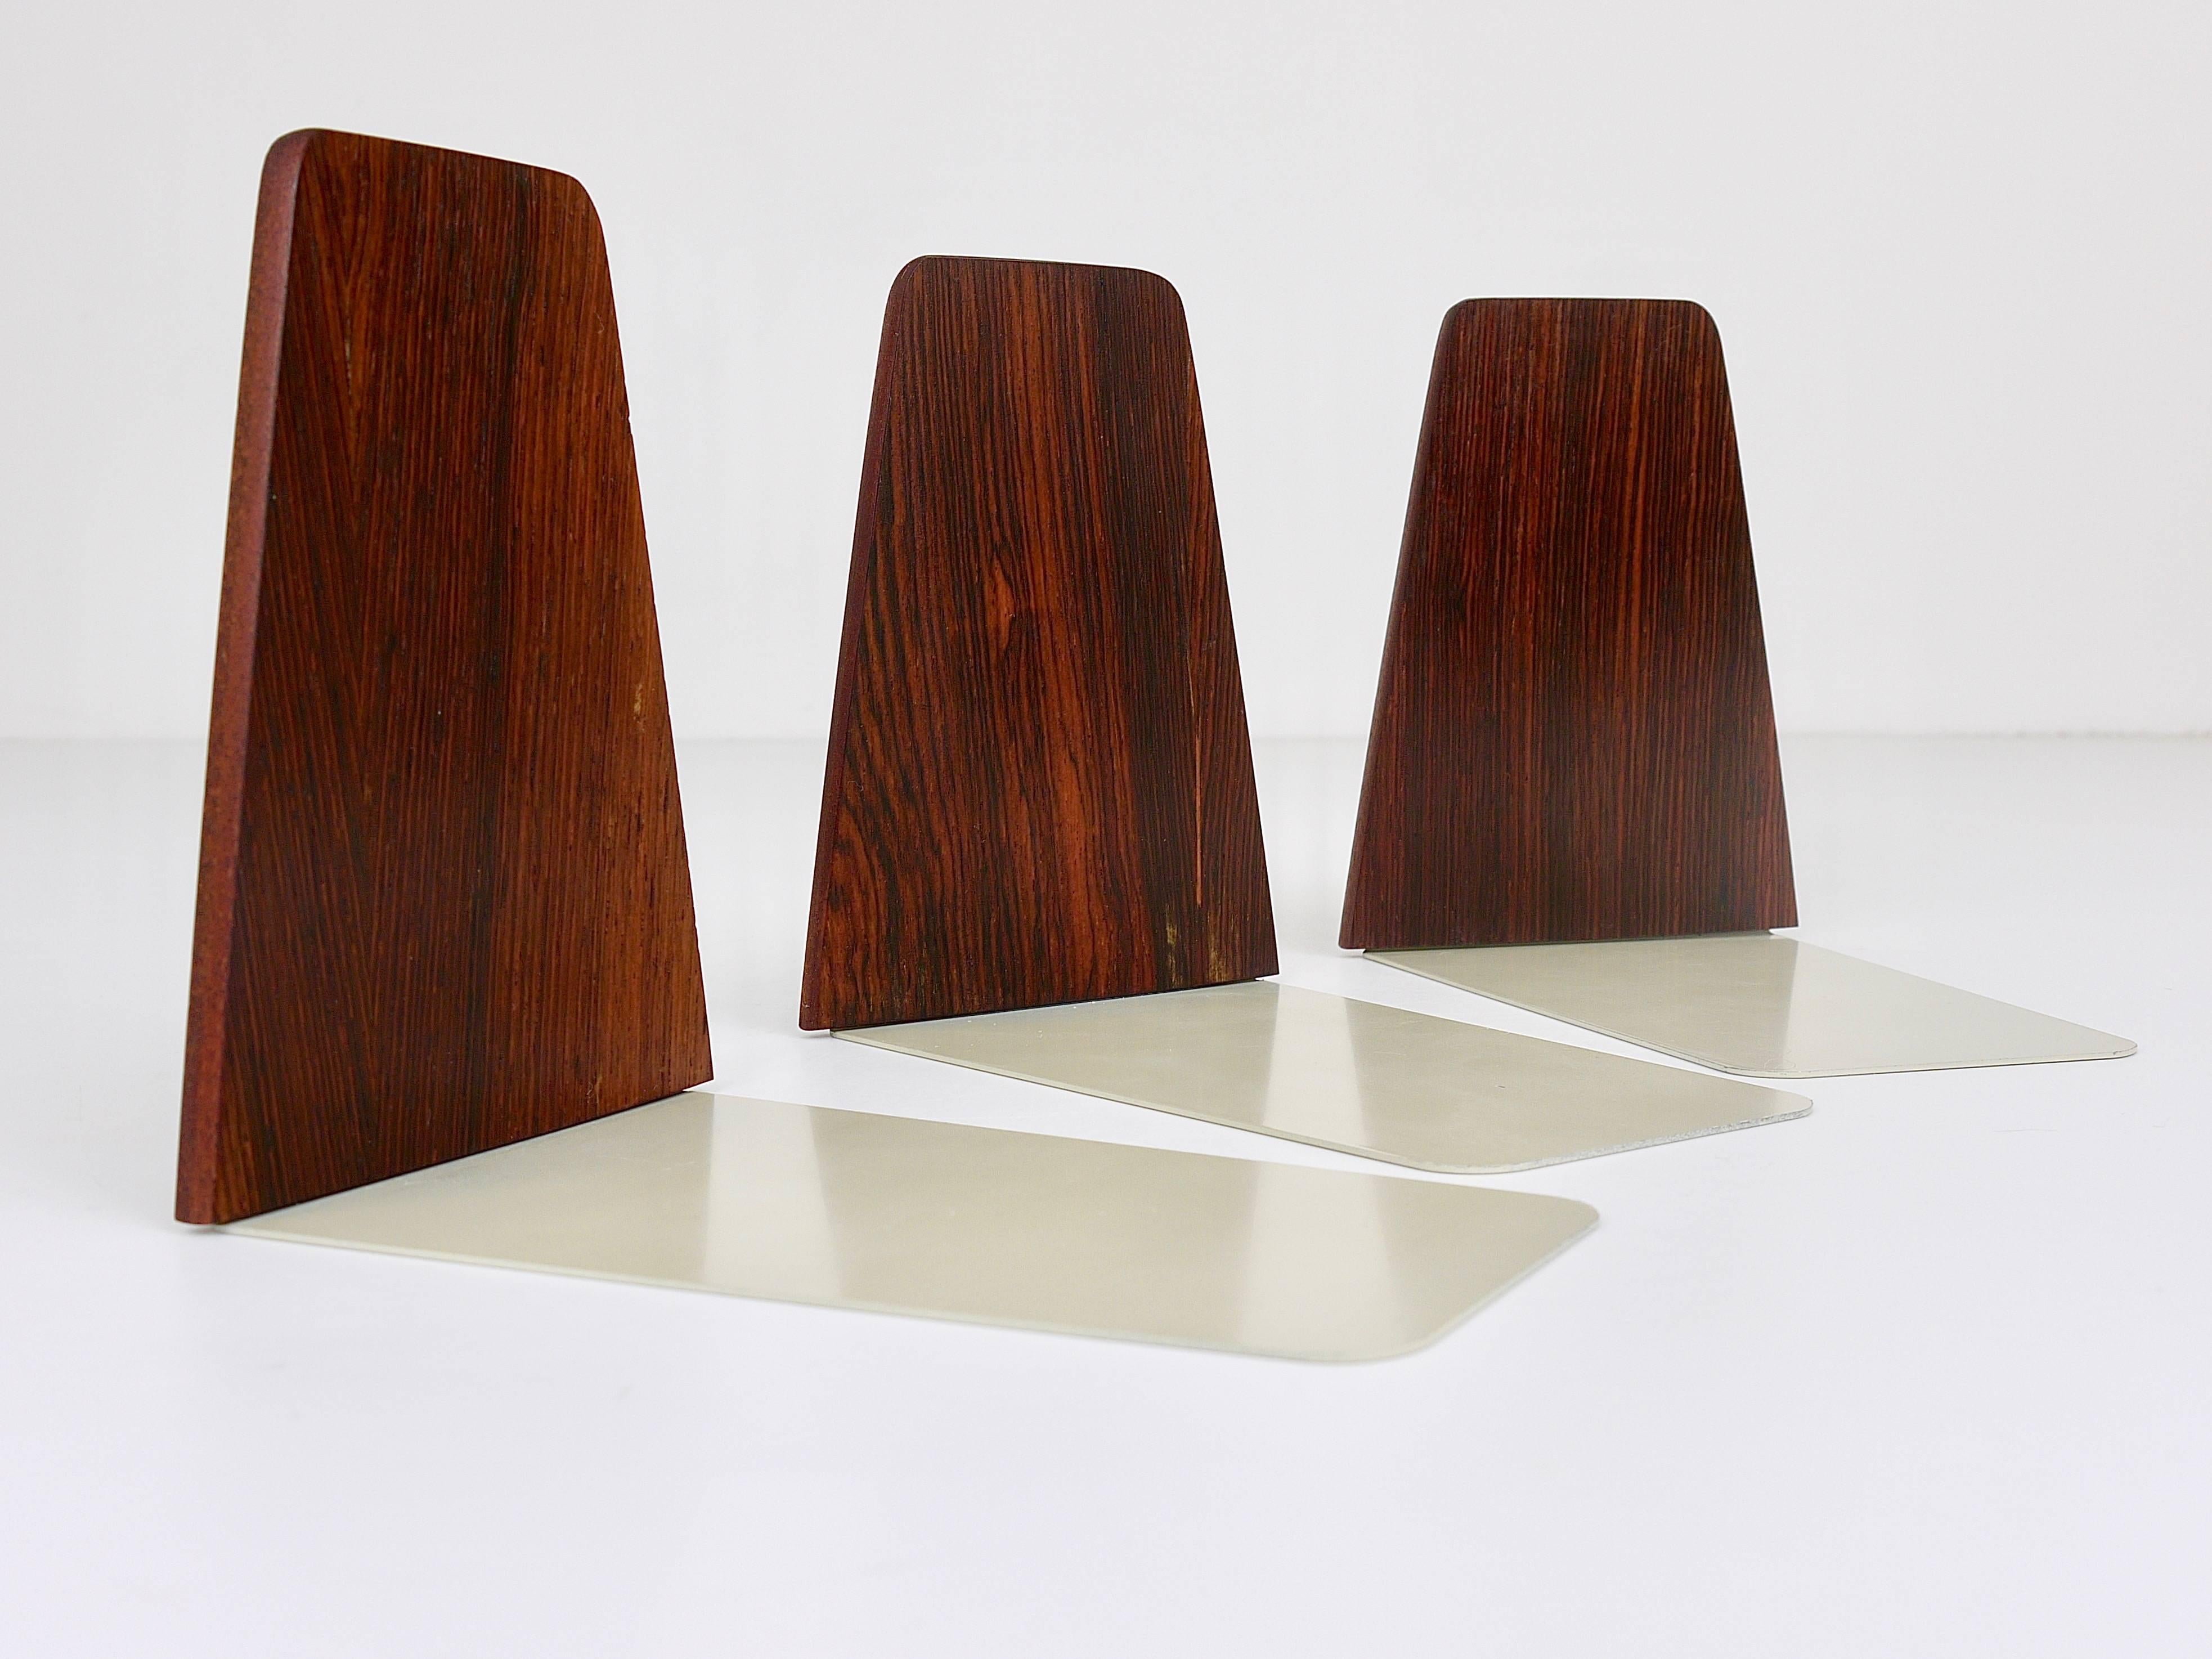 Three Danish Modern Rosewood and Metal Book Ends, Denmark, 1960s 2